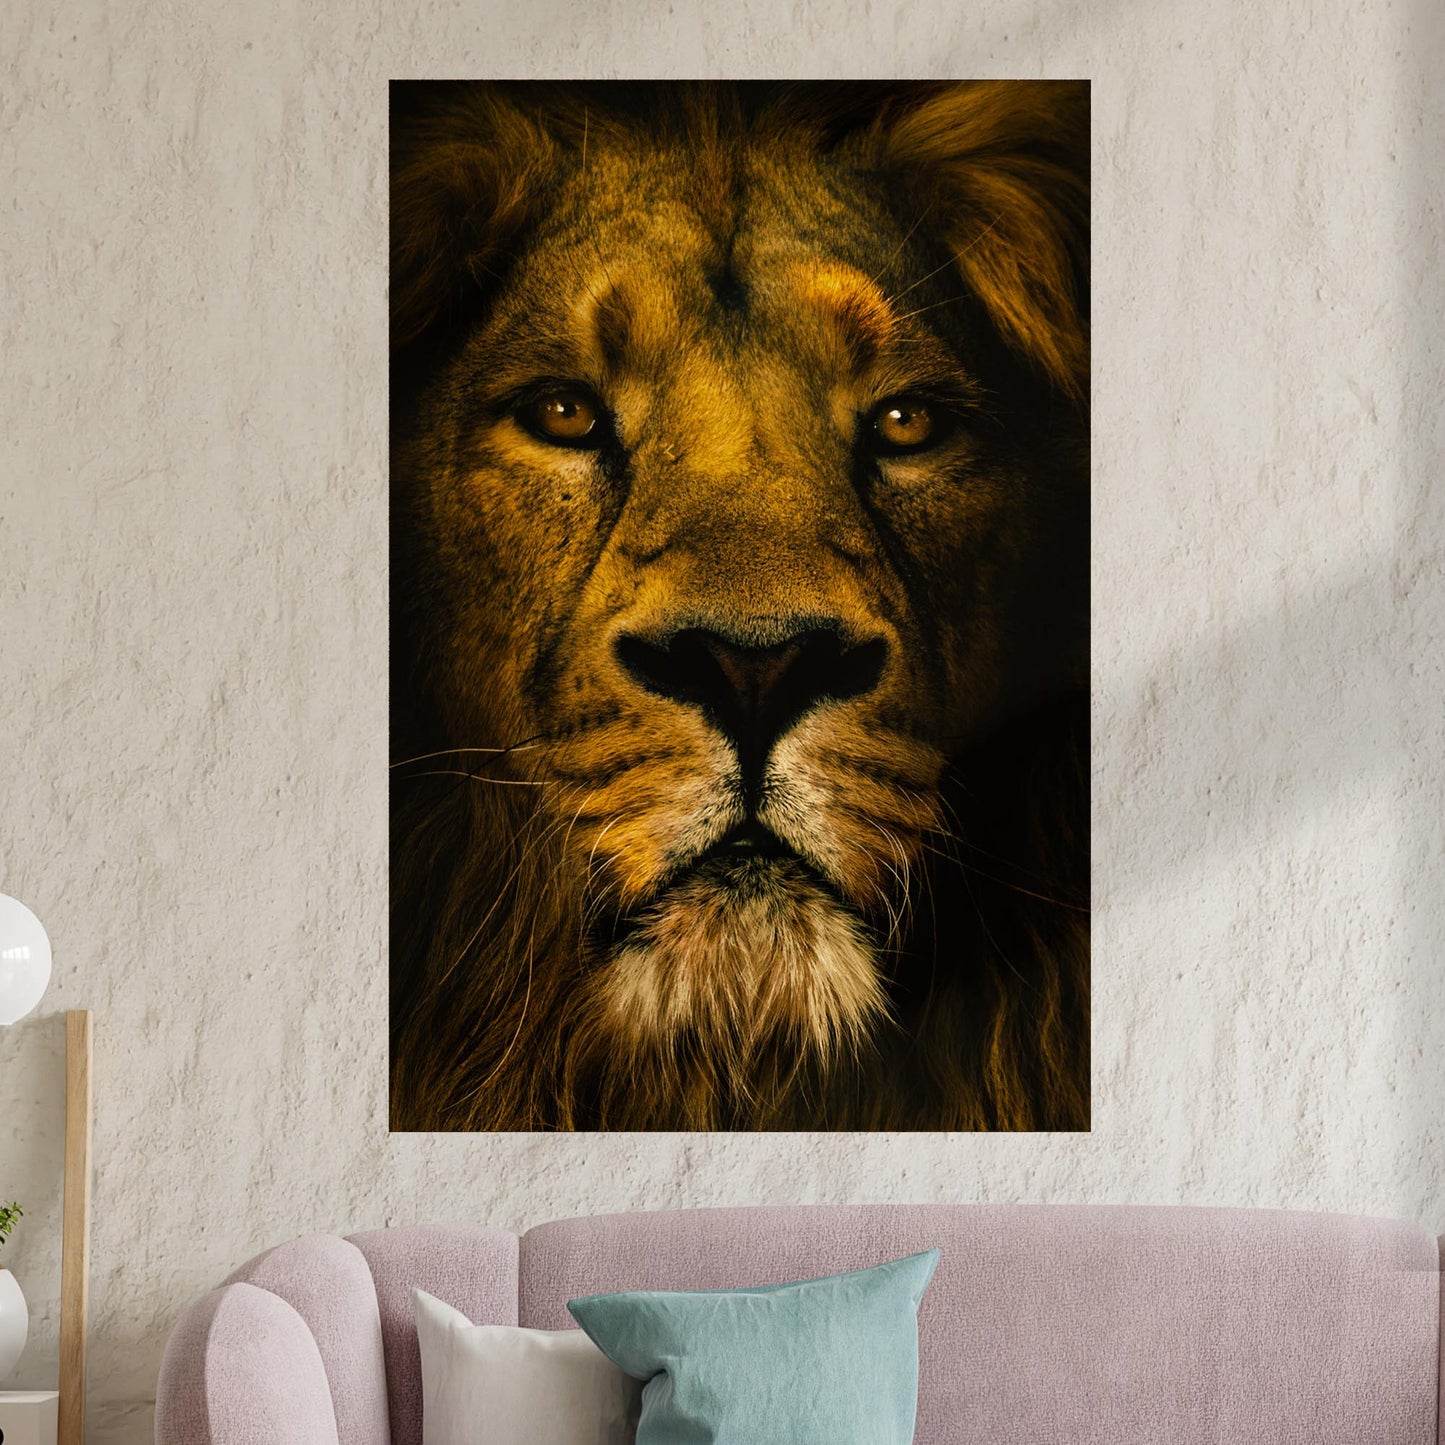 Golden Lion King Portrait Canvas Wall Art Style 1 - Image by Tailored Canvases